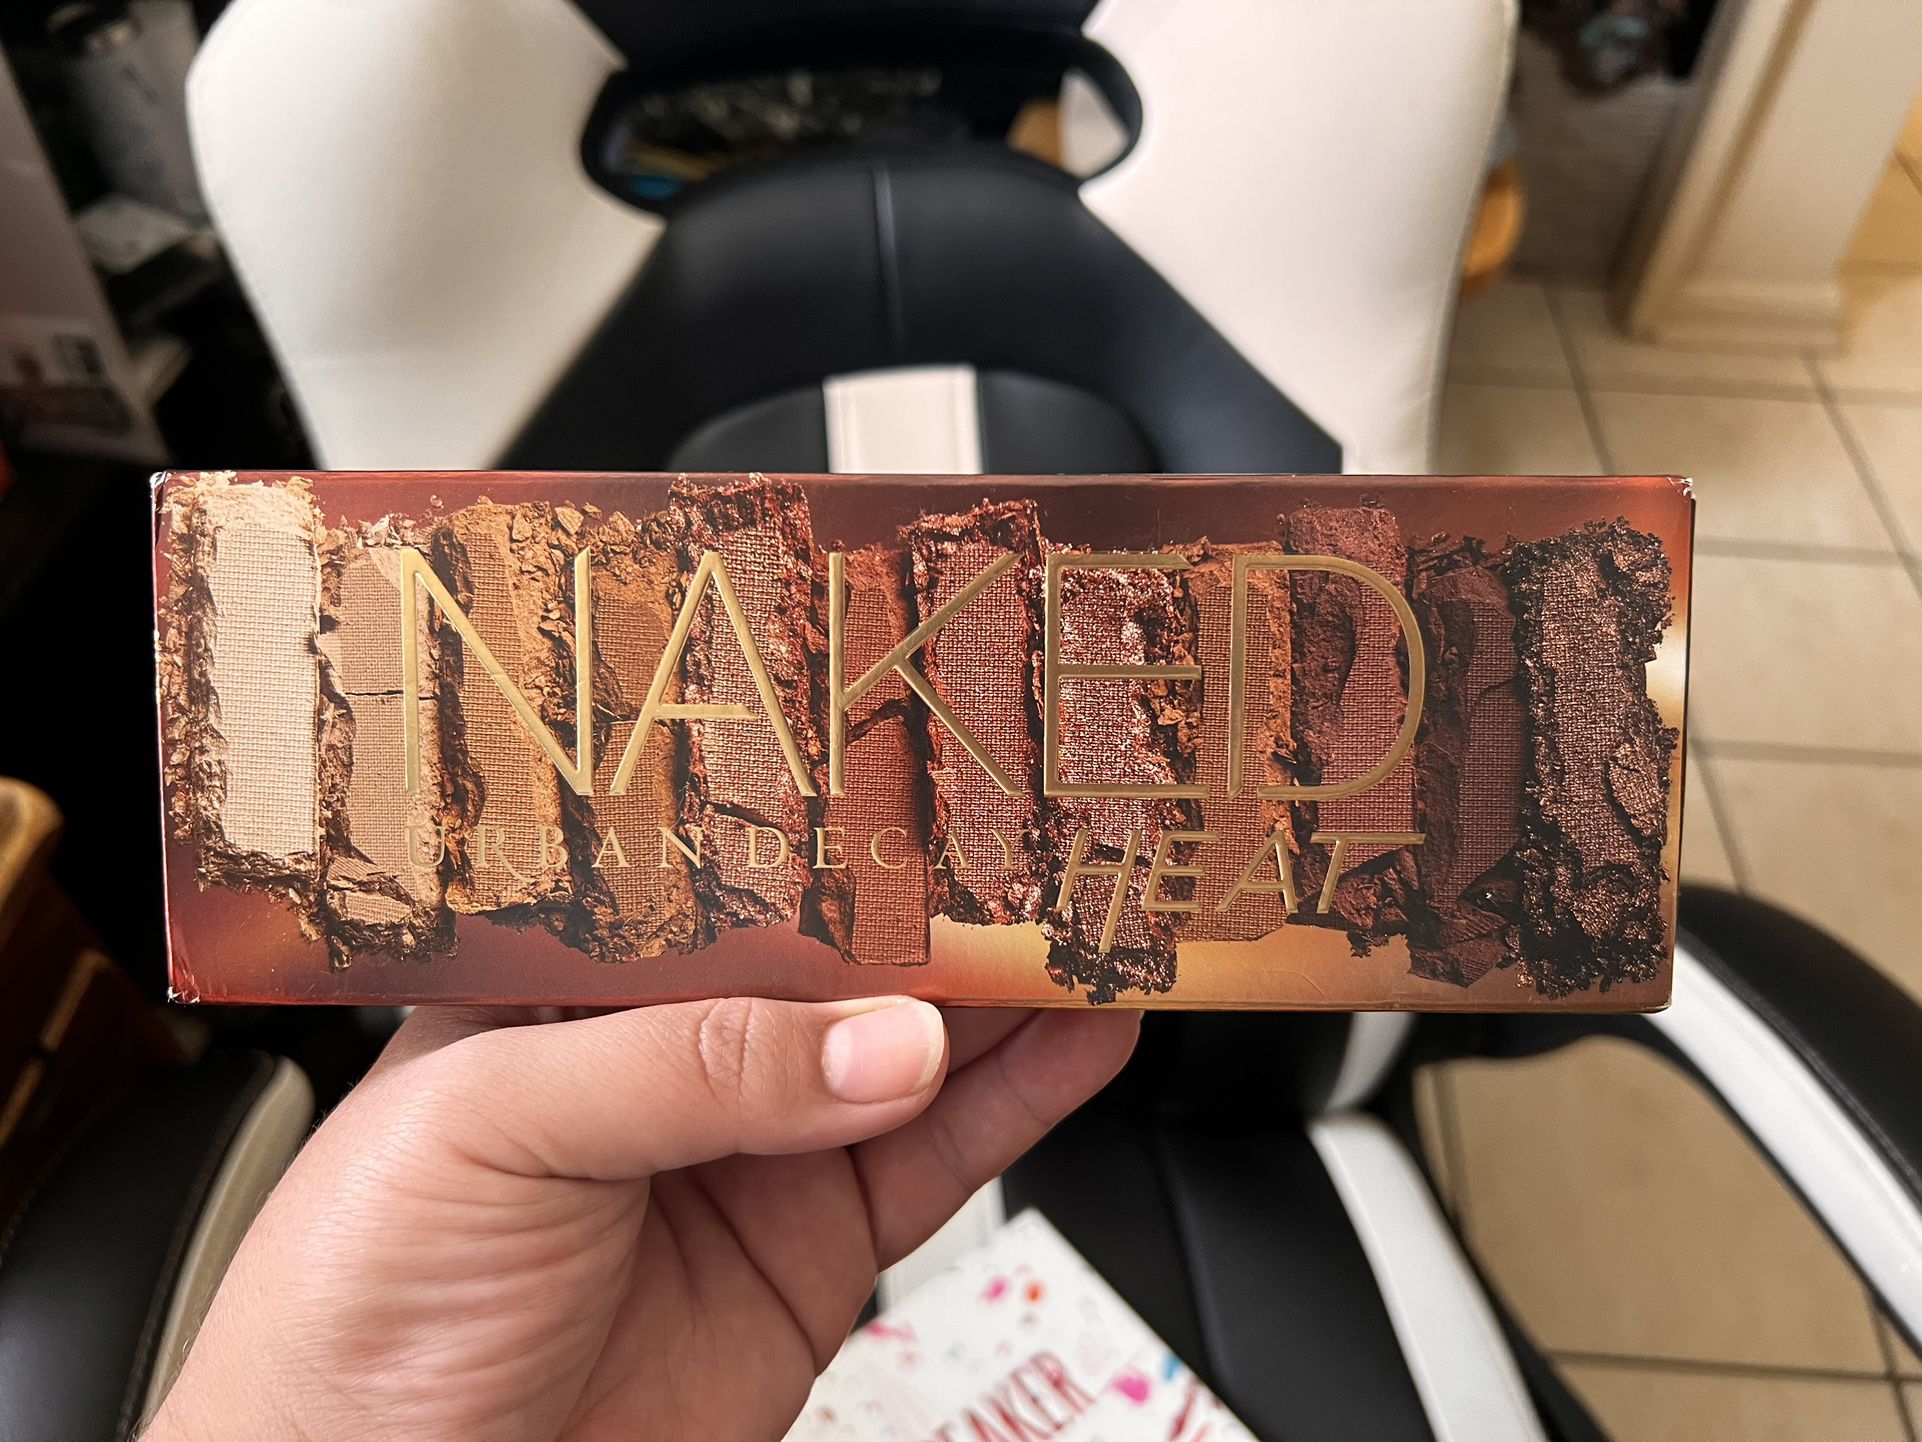 Urban Decay Naked Heat Palette 